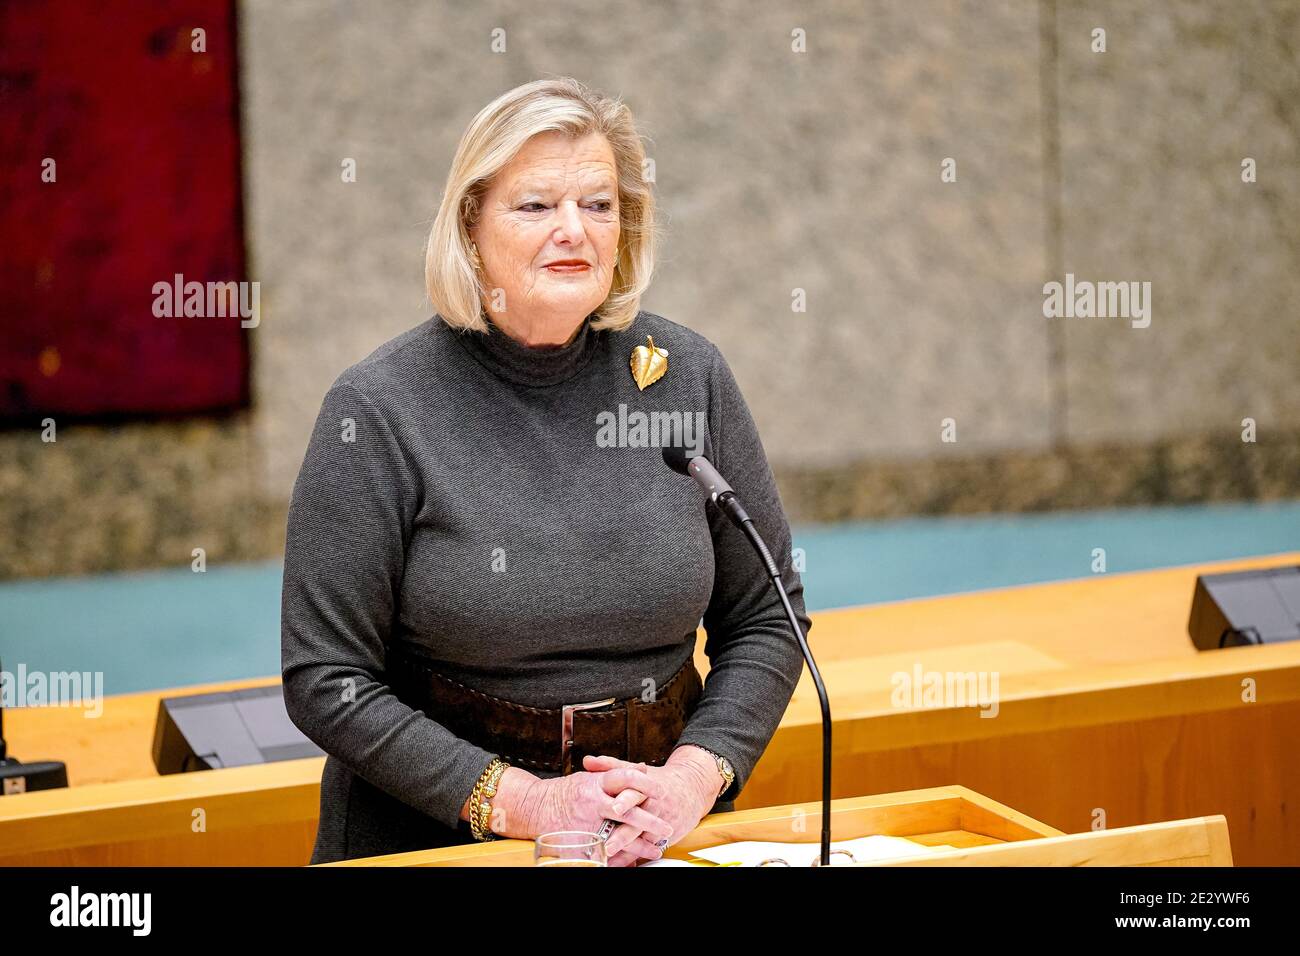 The Hague Netherlands January 12 Secretary Of State For Justice And Safety Ankie Broekers Knol Seen During The Plenary Debate In The Tweede Kamer Stock Photo Alamy